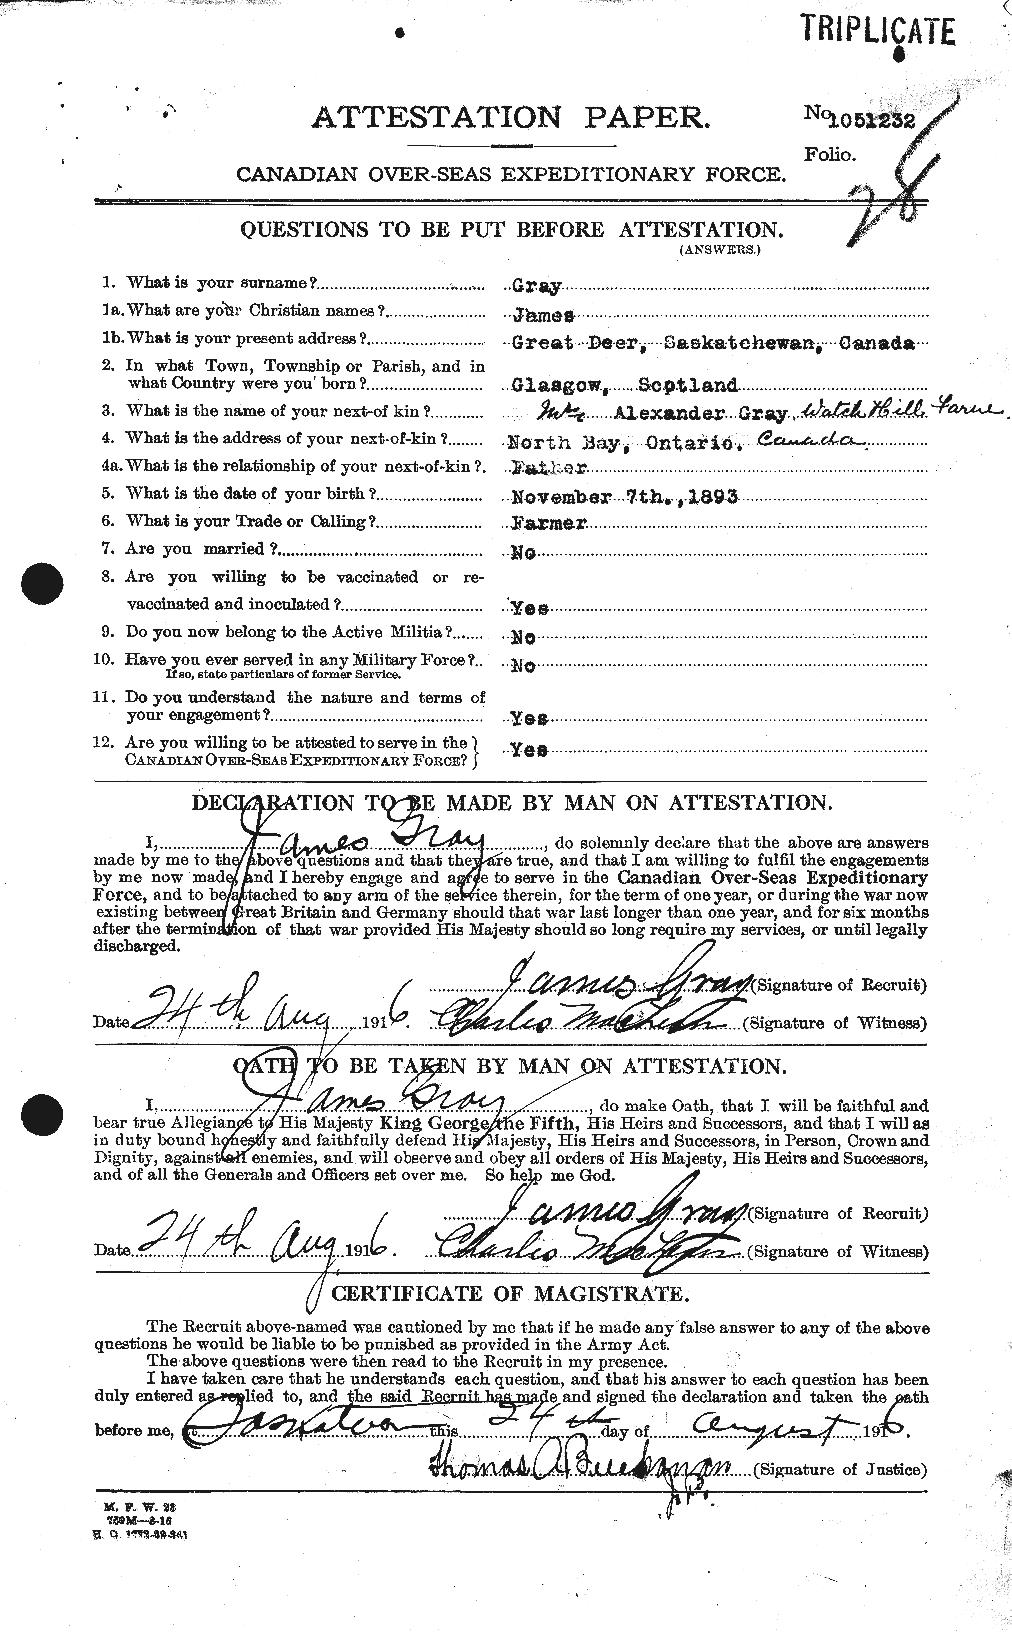 Personnel Records of the First World War - CEF 363279a